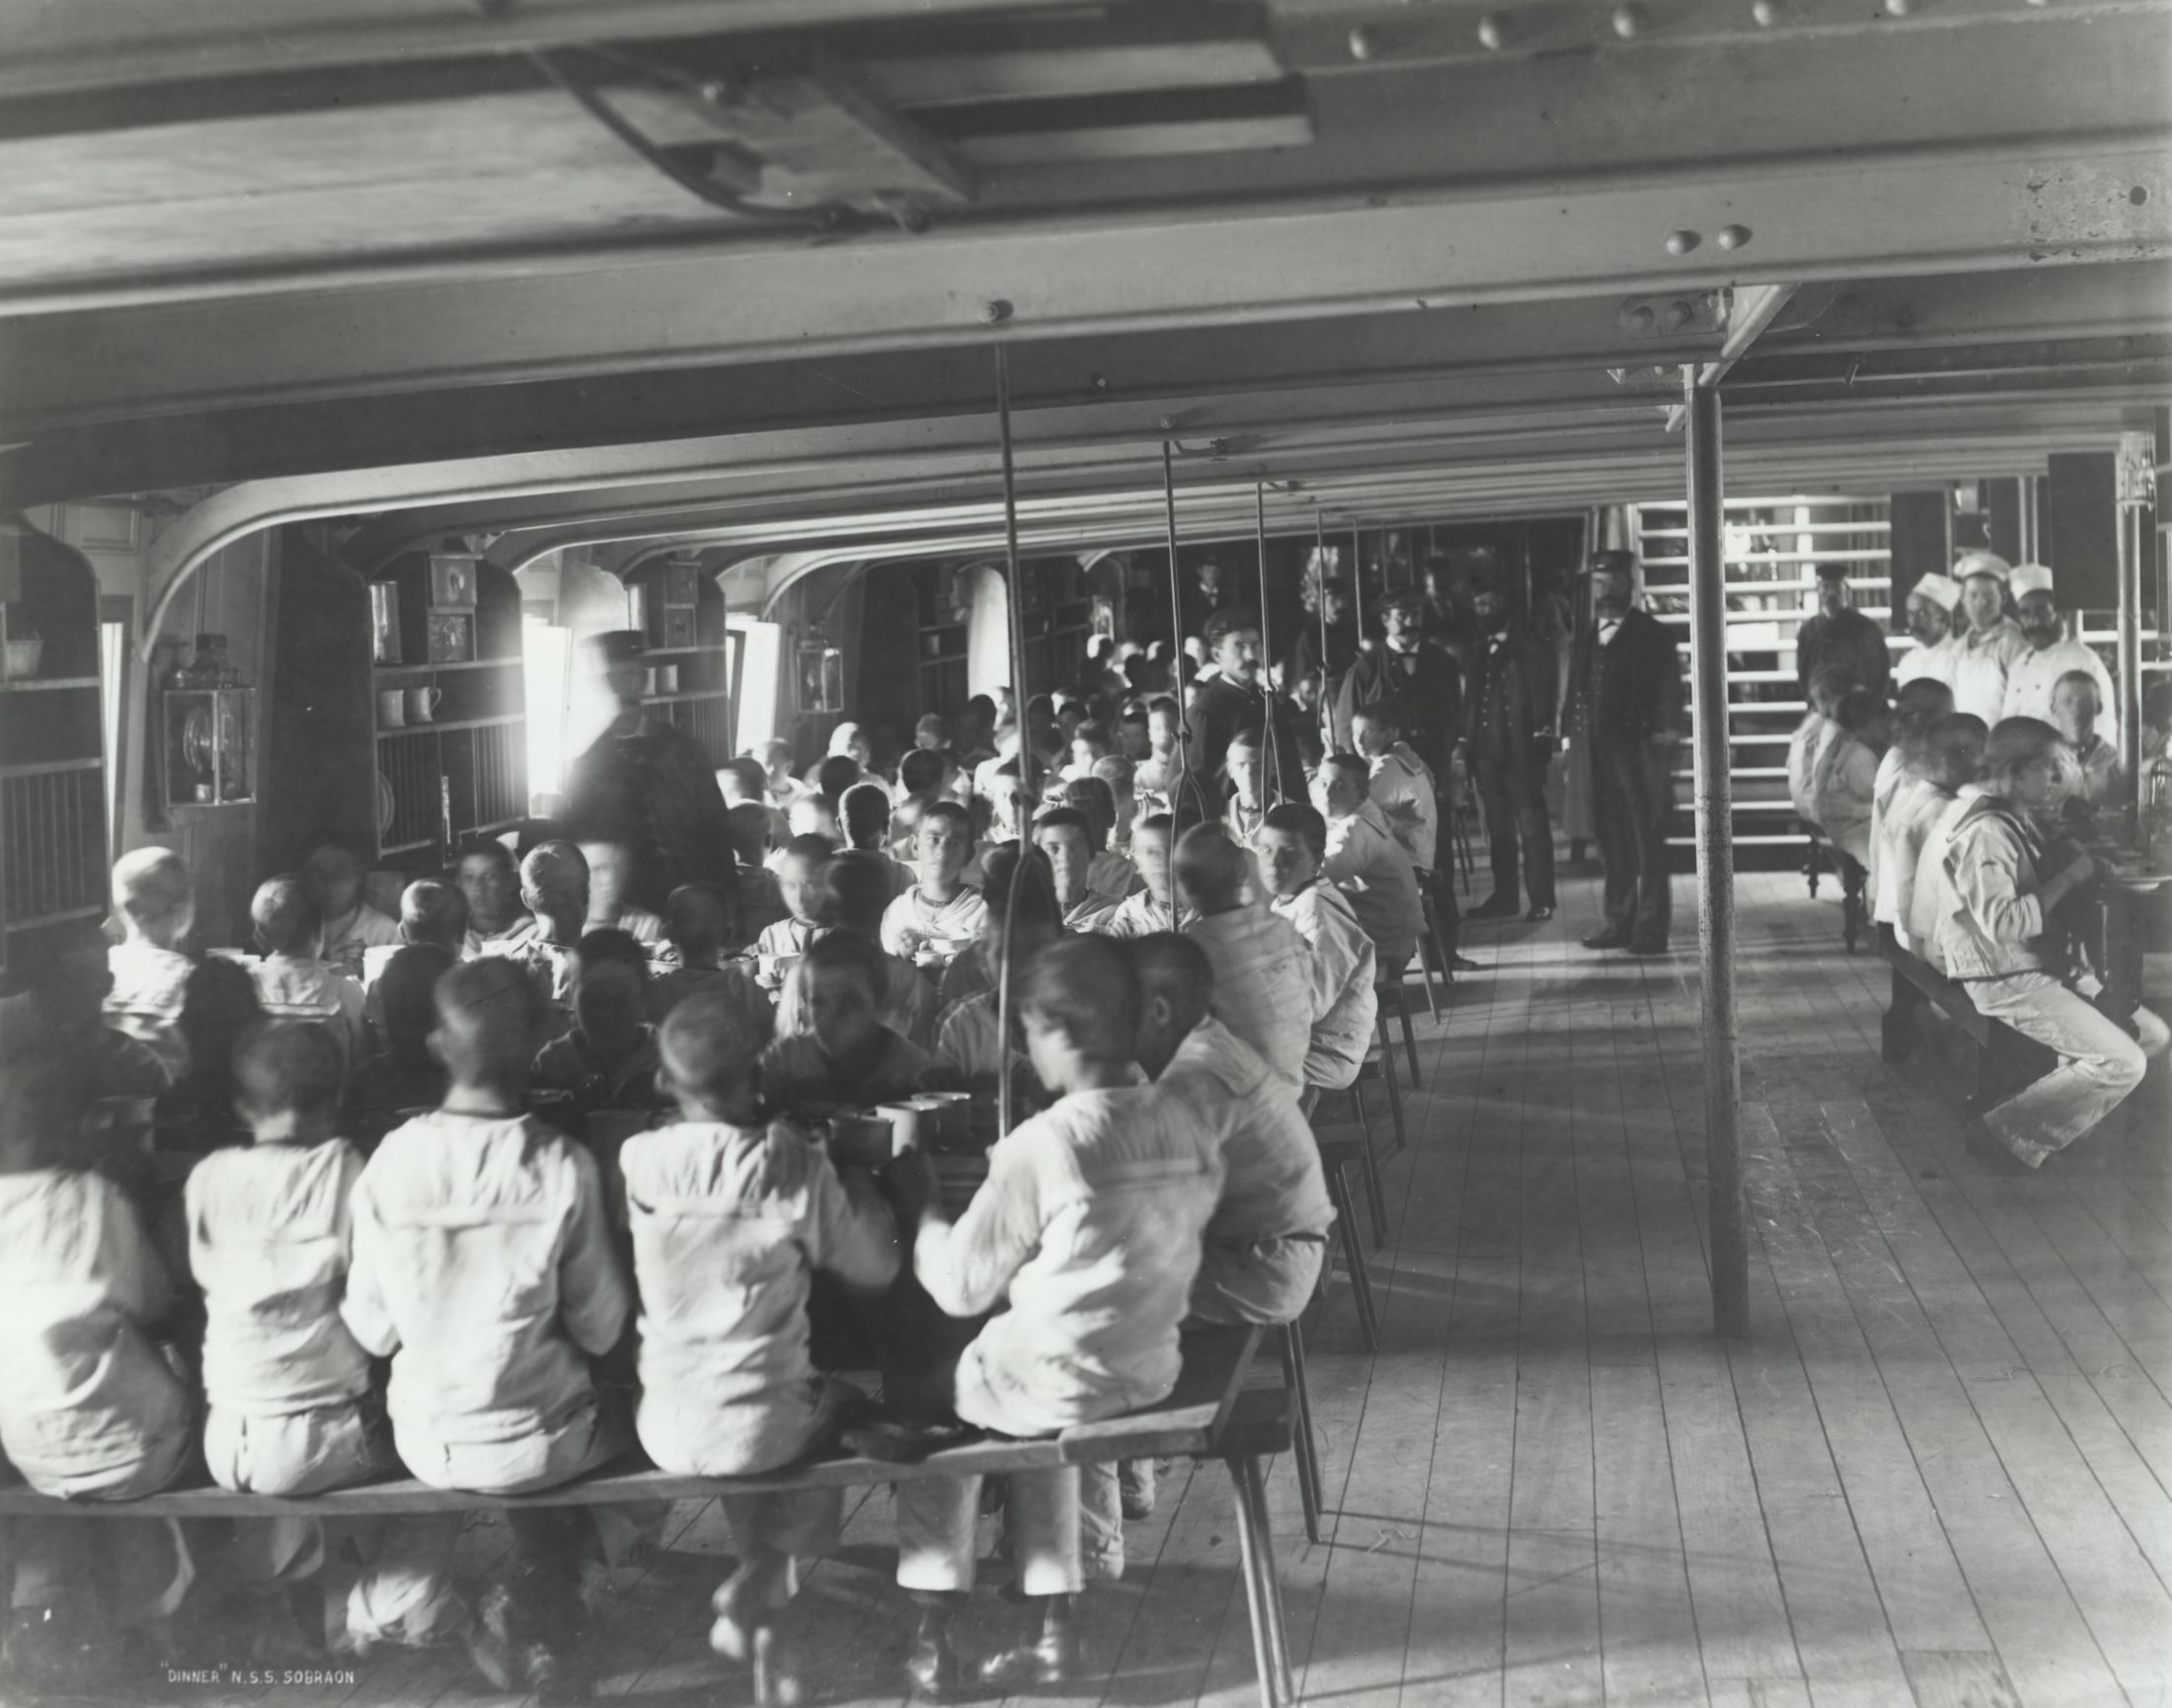 Boys in nautical clothing sit at long tables in a ship's lower deck  